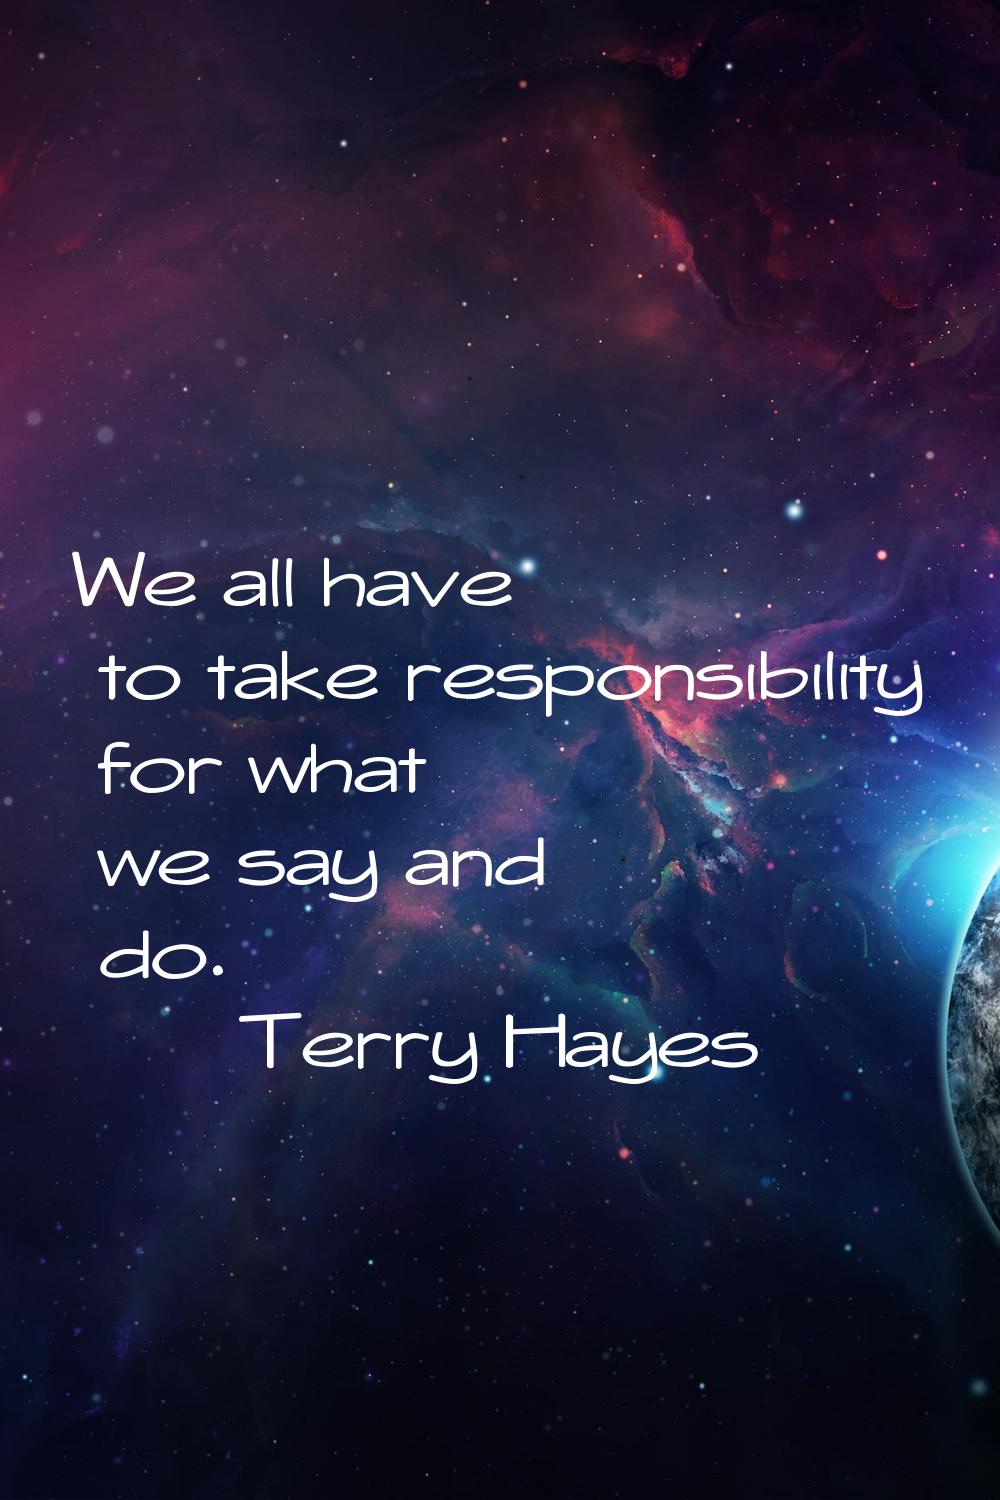 We all have to take responsibility for what we say and do.